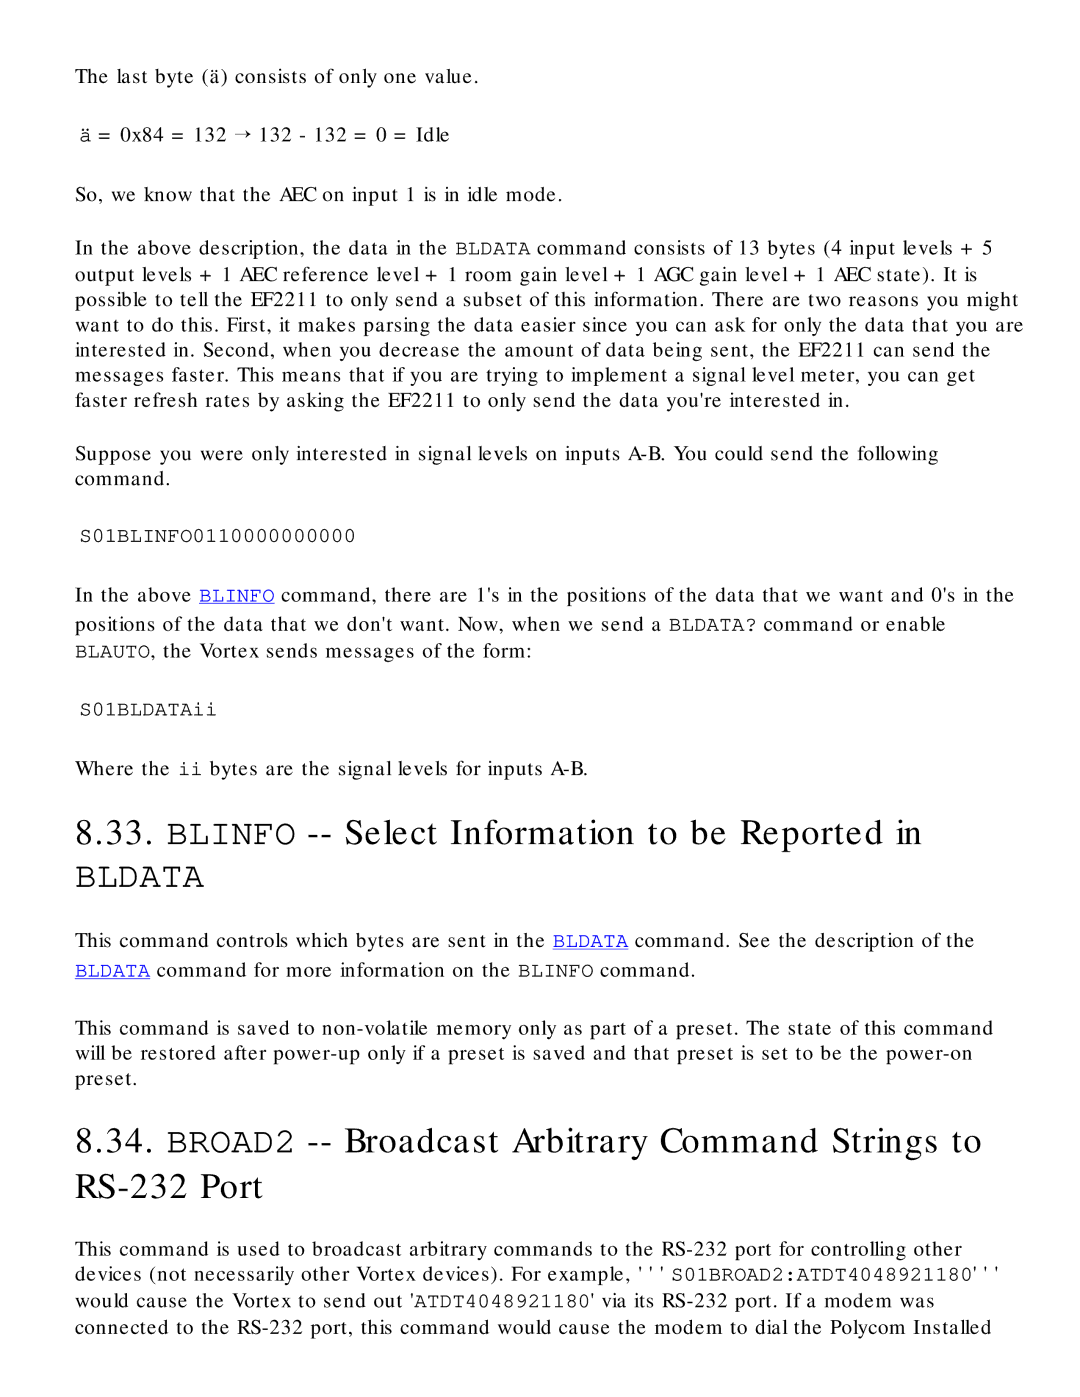 Polycom RS-232 manual Blinfo -- Select Information to be Reported, Where the ii bytes are the signal levels for inputs A-B 